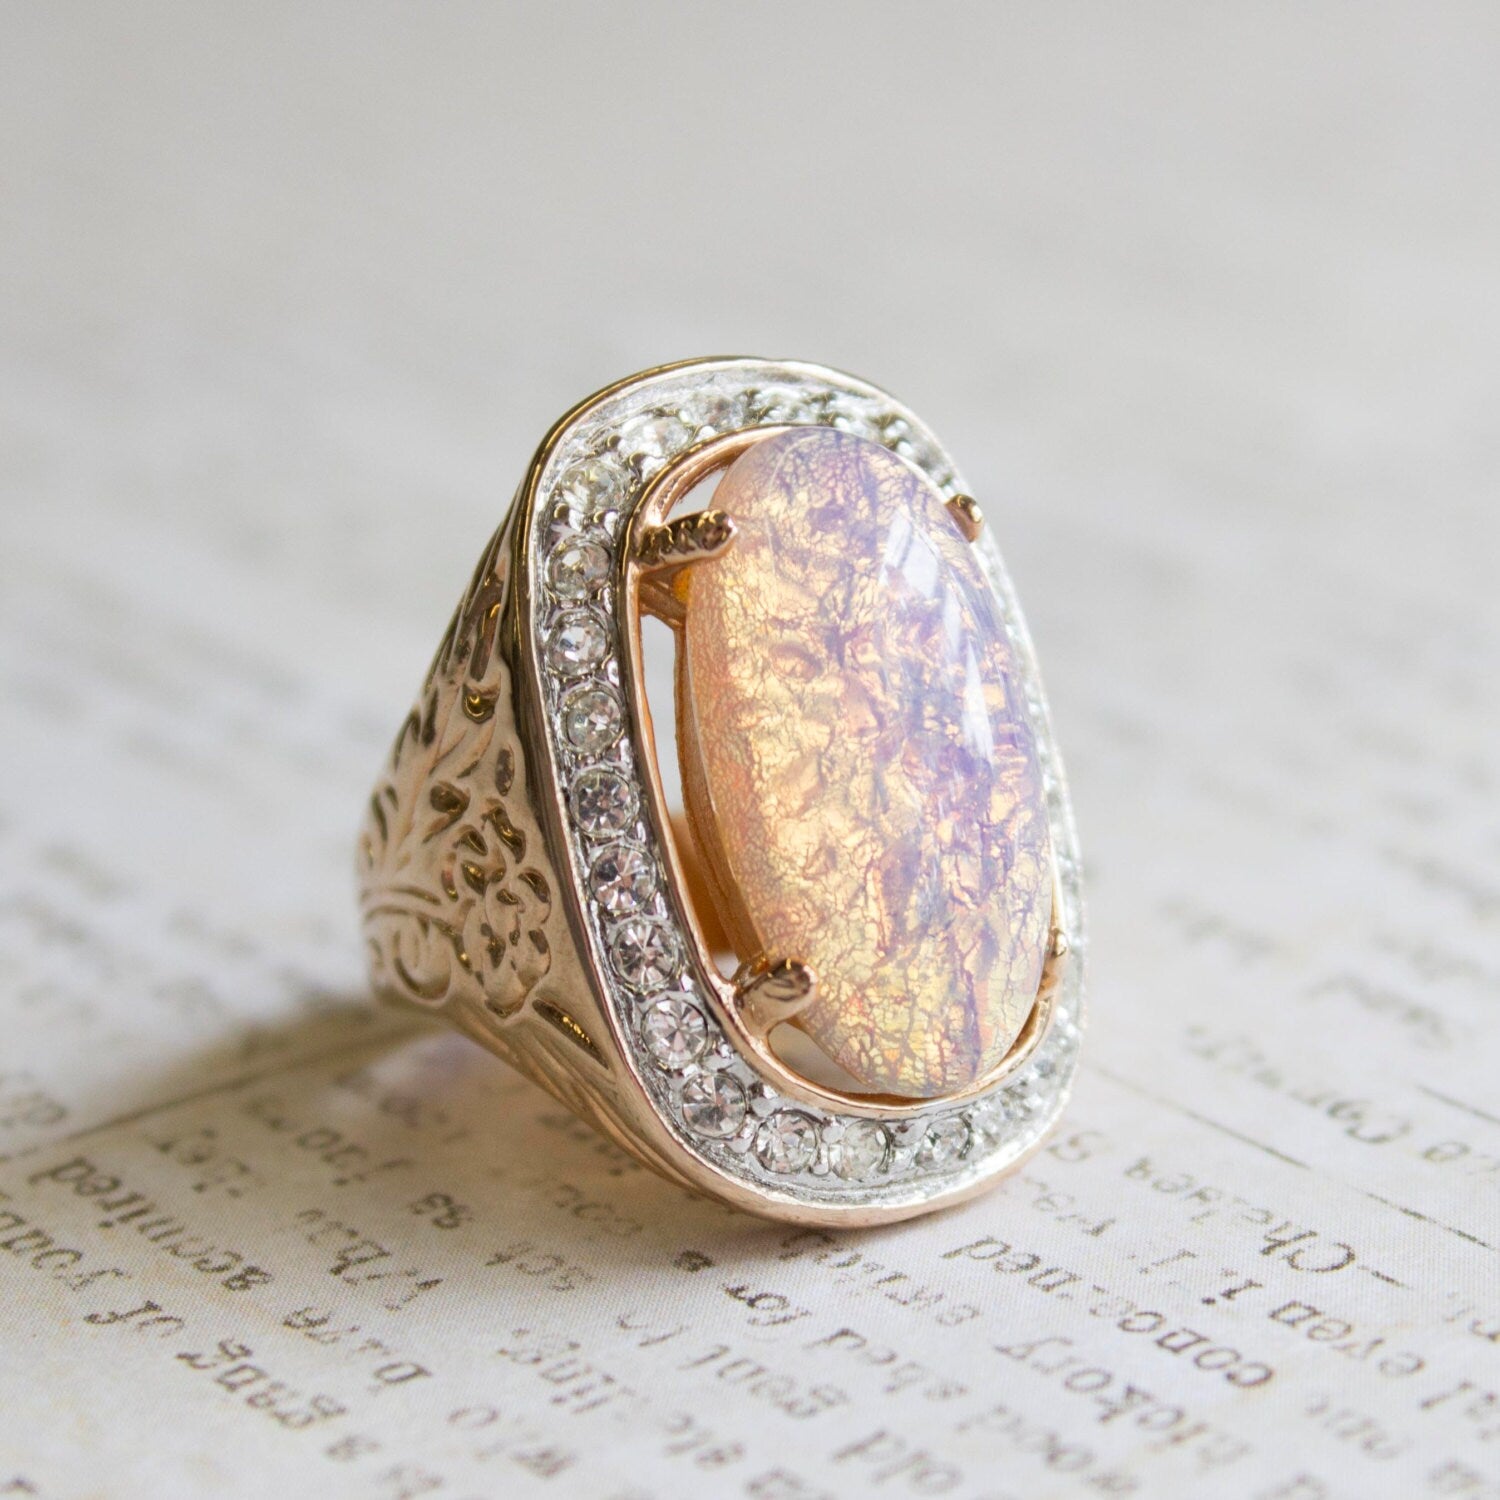 Vintage Ring Large Harlequin Opal and Clear Swarovski Crystals 18k Antique Gold Cocktail Ring Womans #R527 - Limited Stock - Never Worn